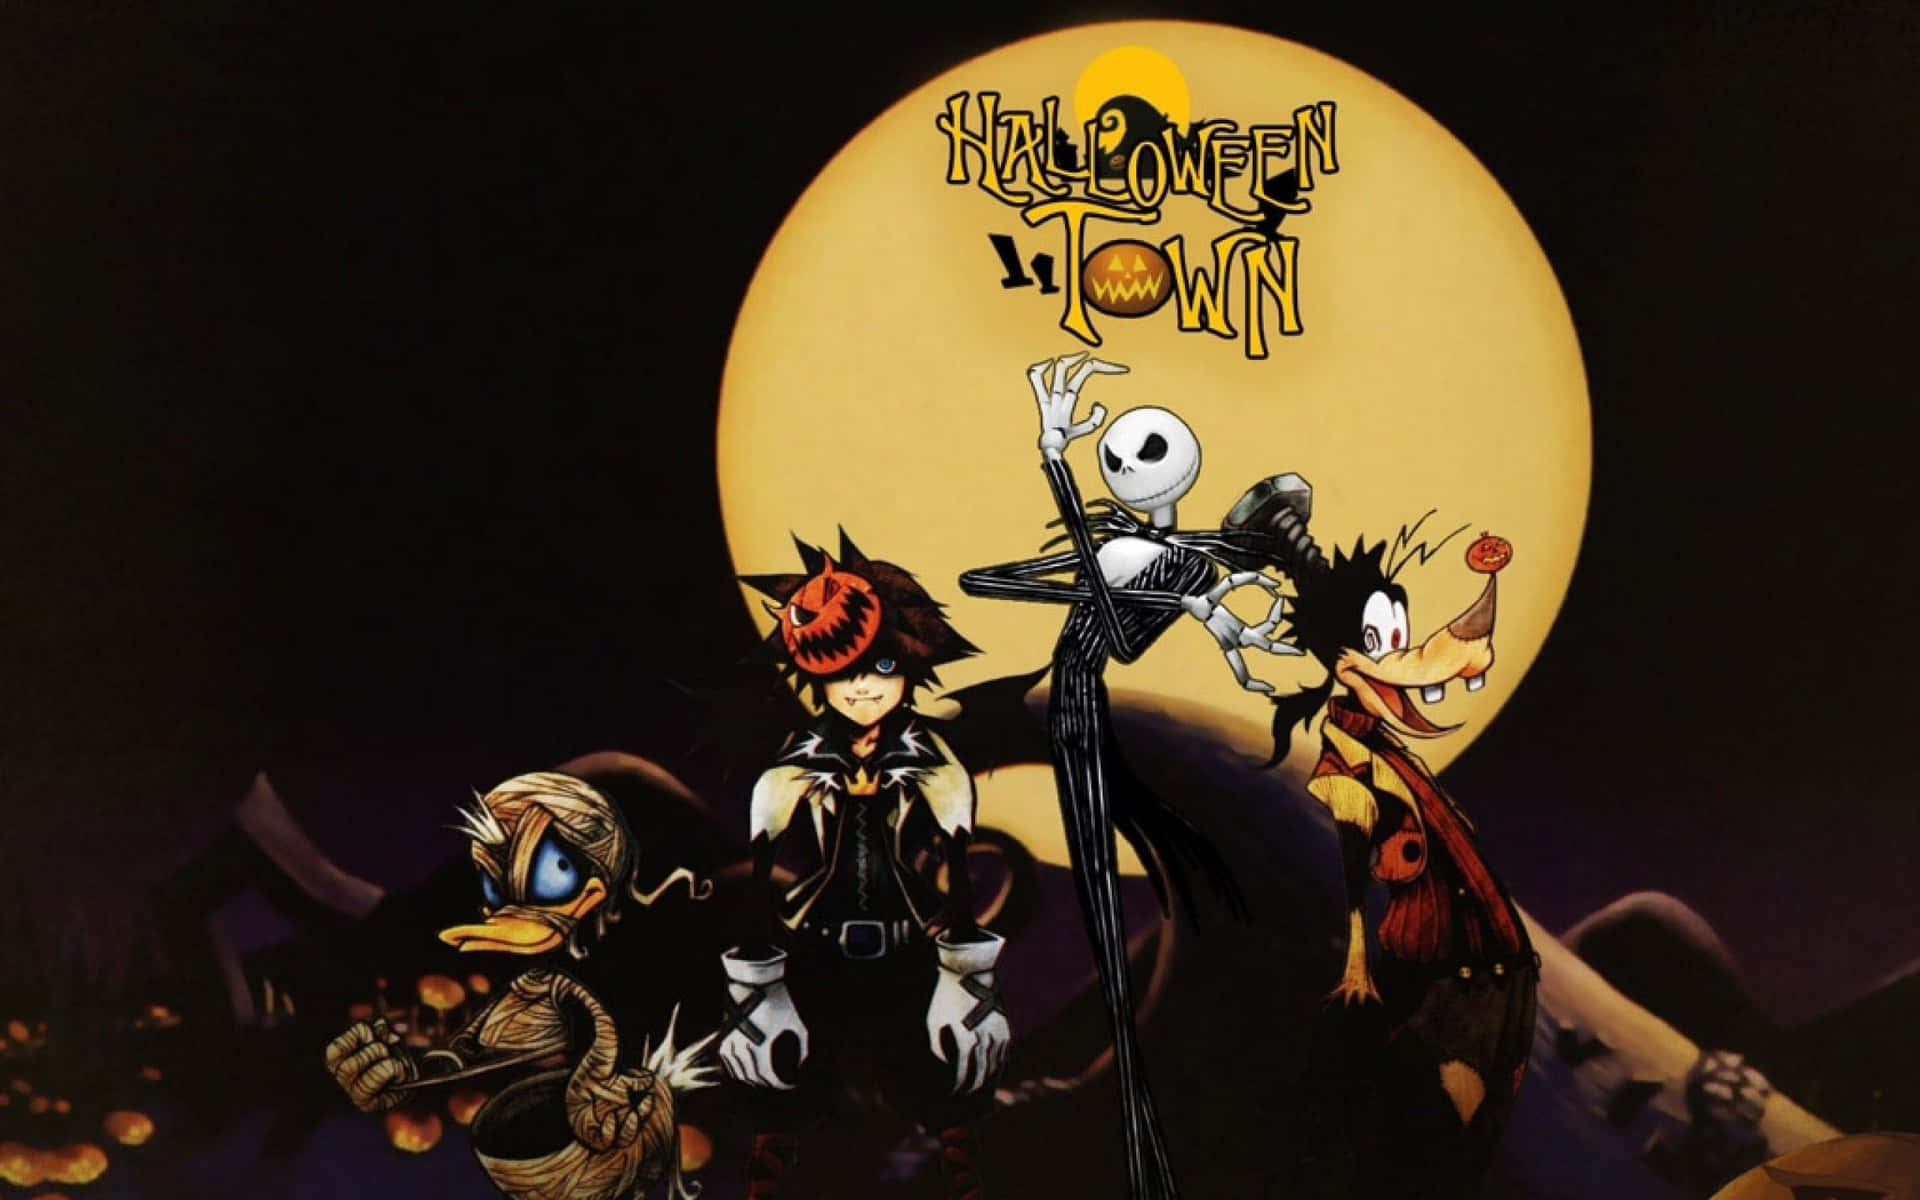 Happy Halloween from Jack Skellington and The Nightmare Before Christmas!